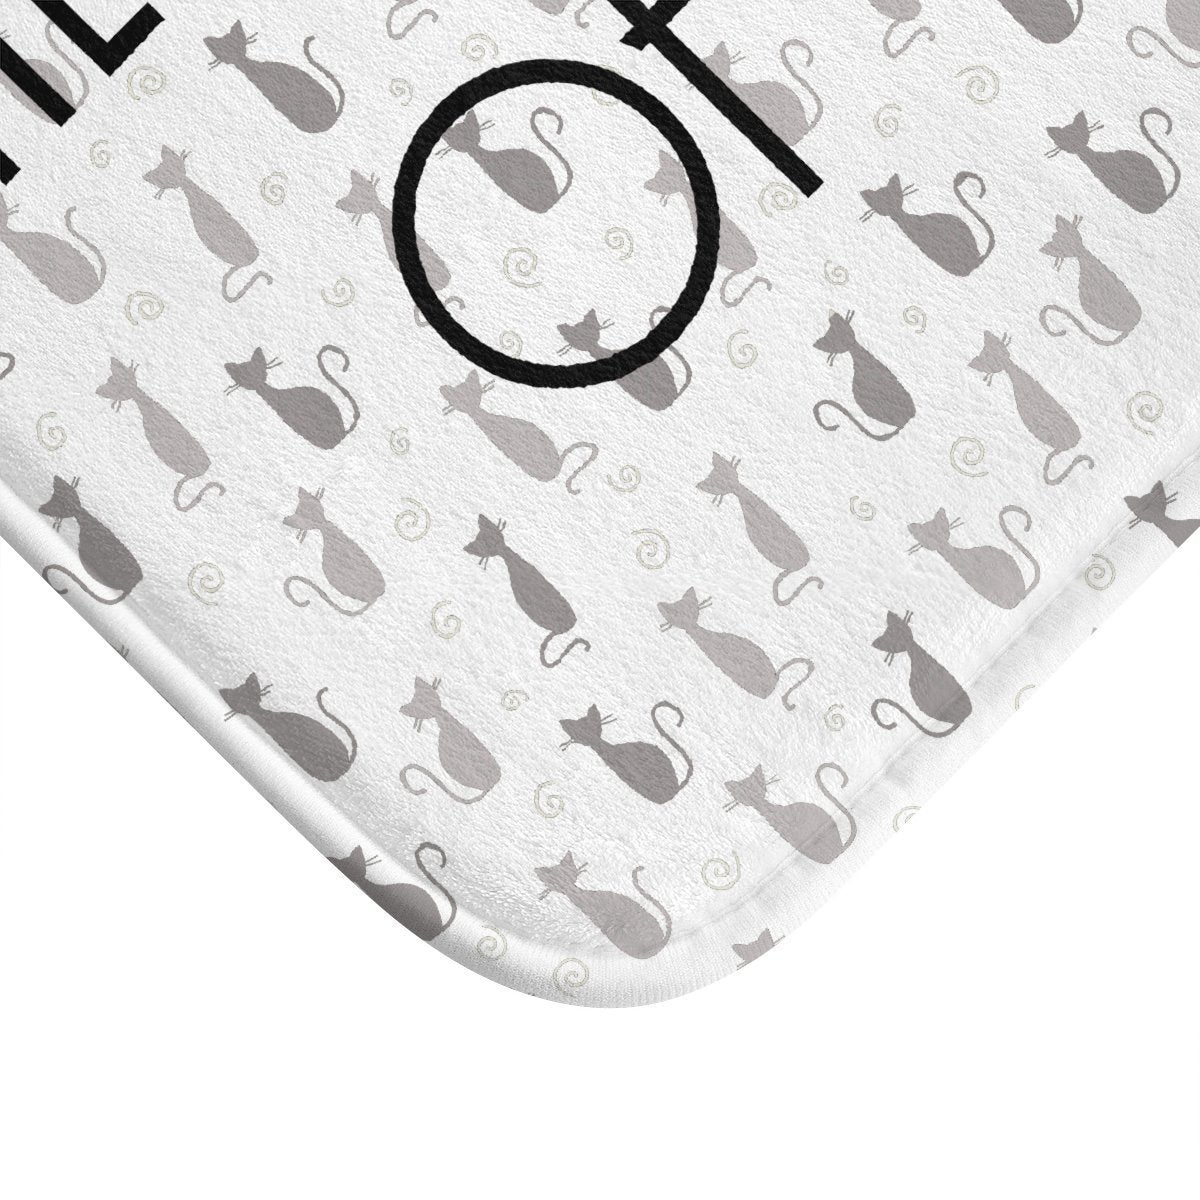 Cat themed home decor for cat lovers - a floor mat with cat print and the text "There's like a bunch of cats in here".